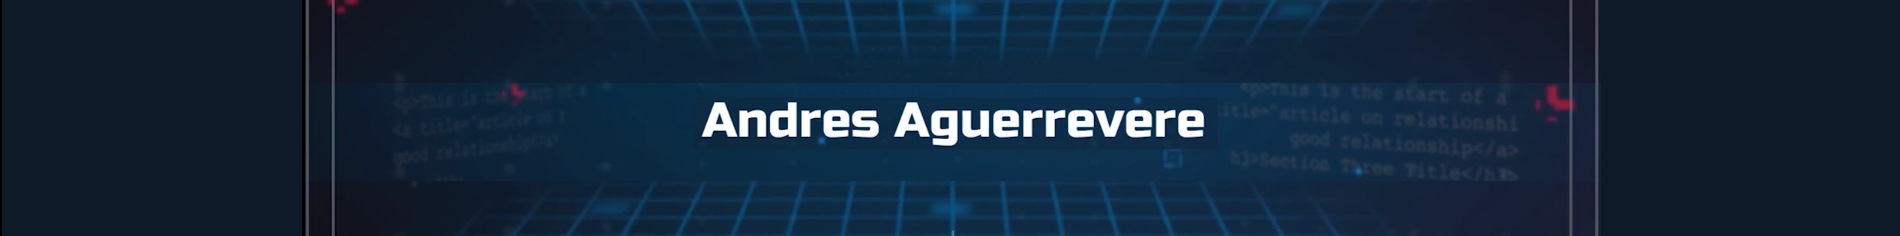 Andres Aguerrevere's profile banner